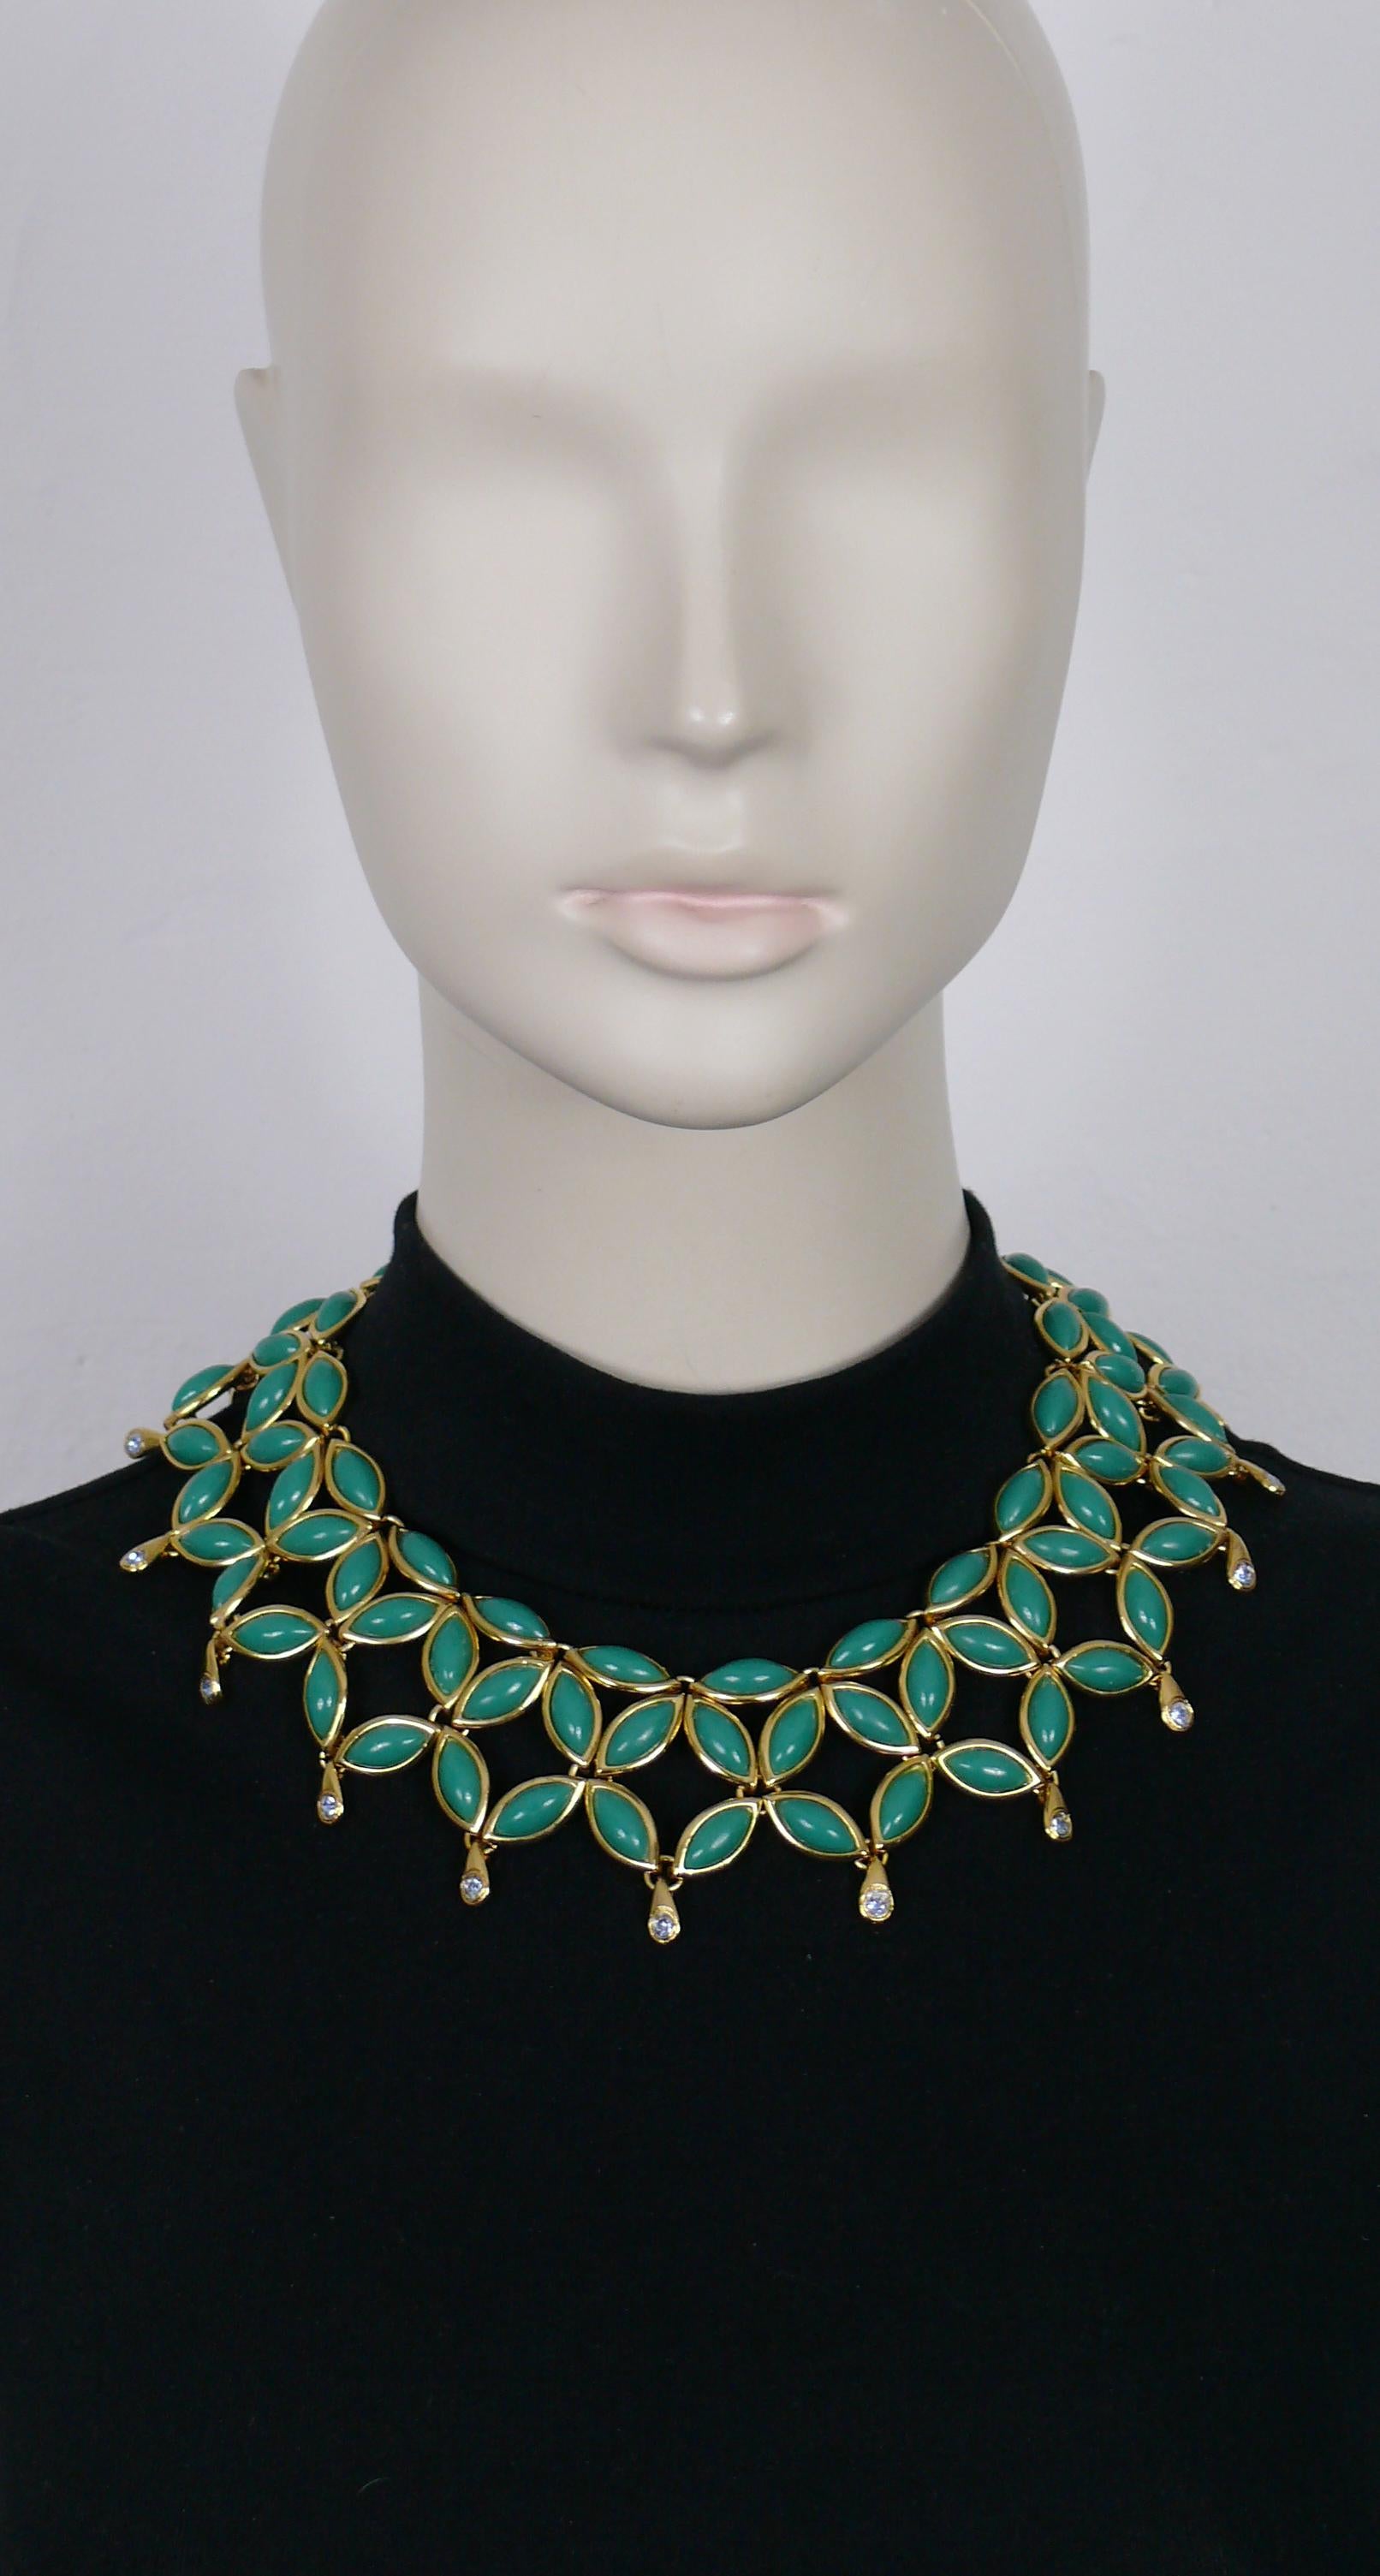 YVES SAINT LAURENT vintage gold tone collar necklace featuring green resin cabochons and acqua blue crystals.

Spring clasp closure.
Adjustable length.

Embossed YSL Made in France.

Indicative measurements : adjustable length from approx. 37 cm